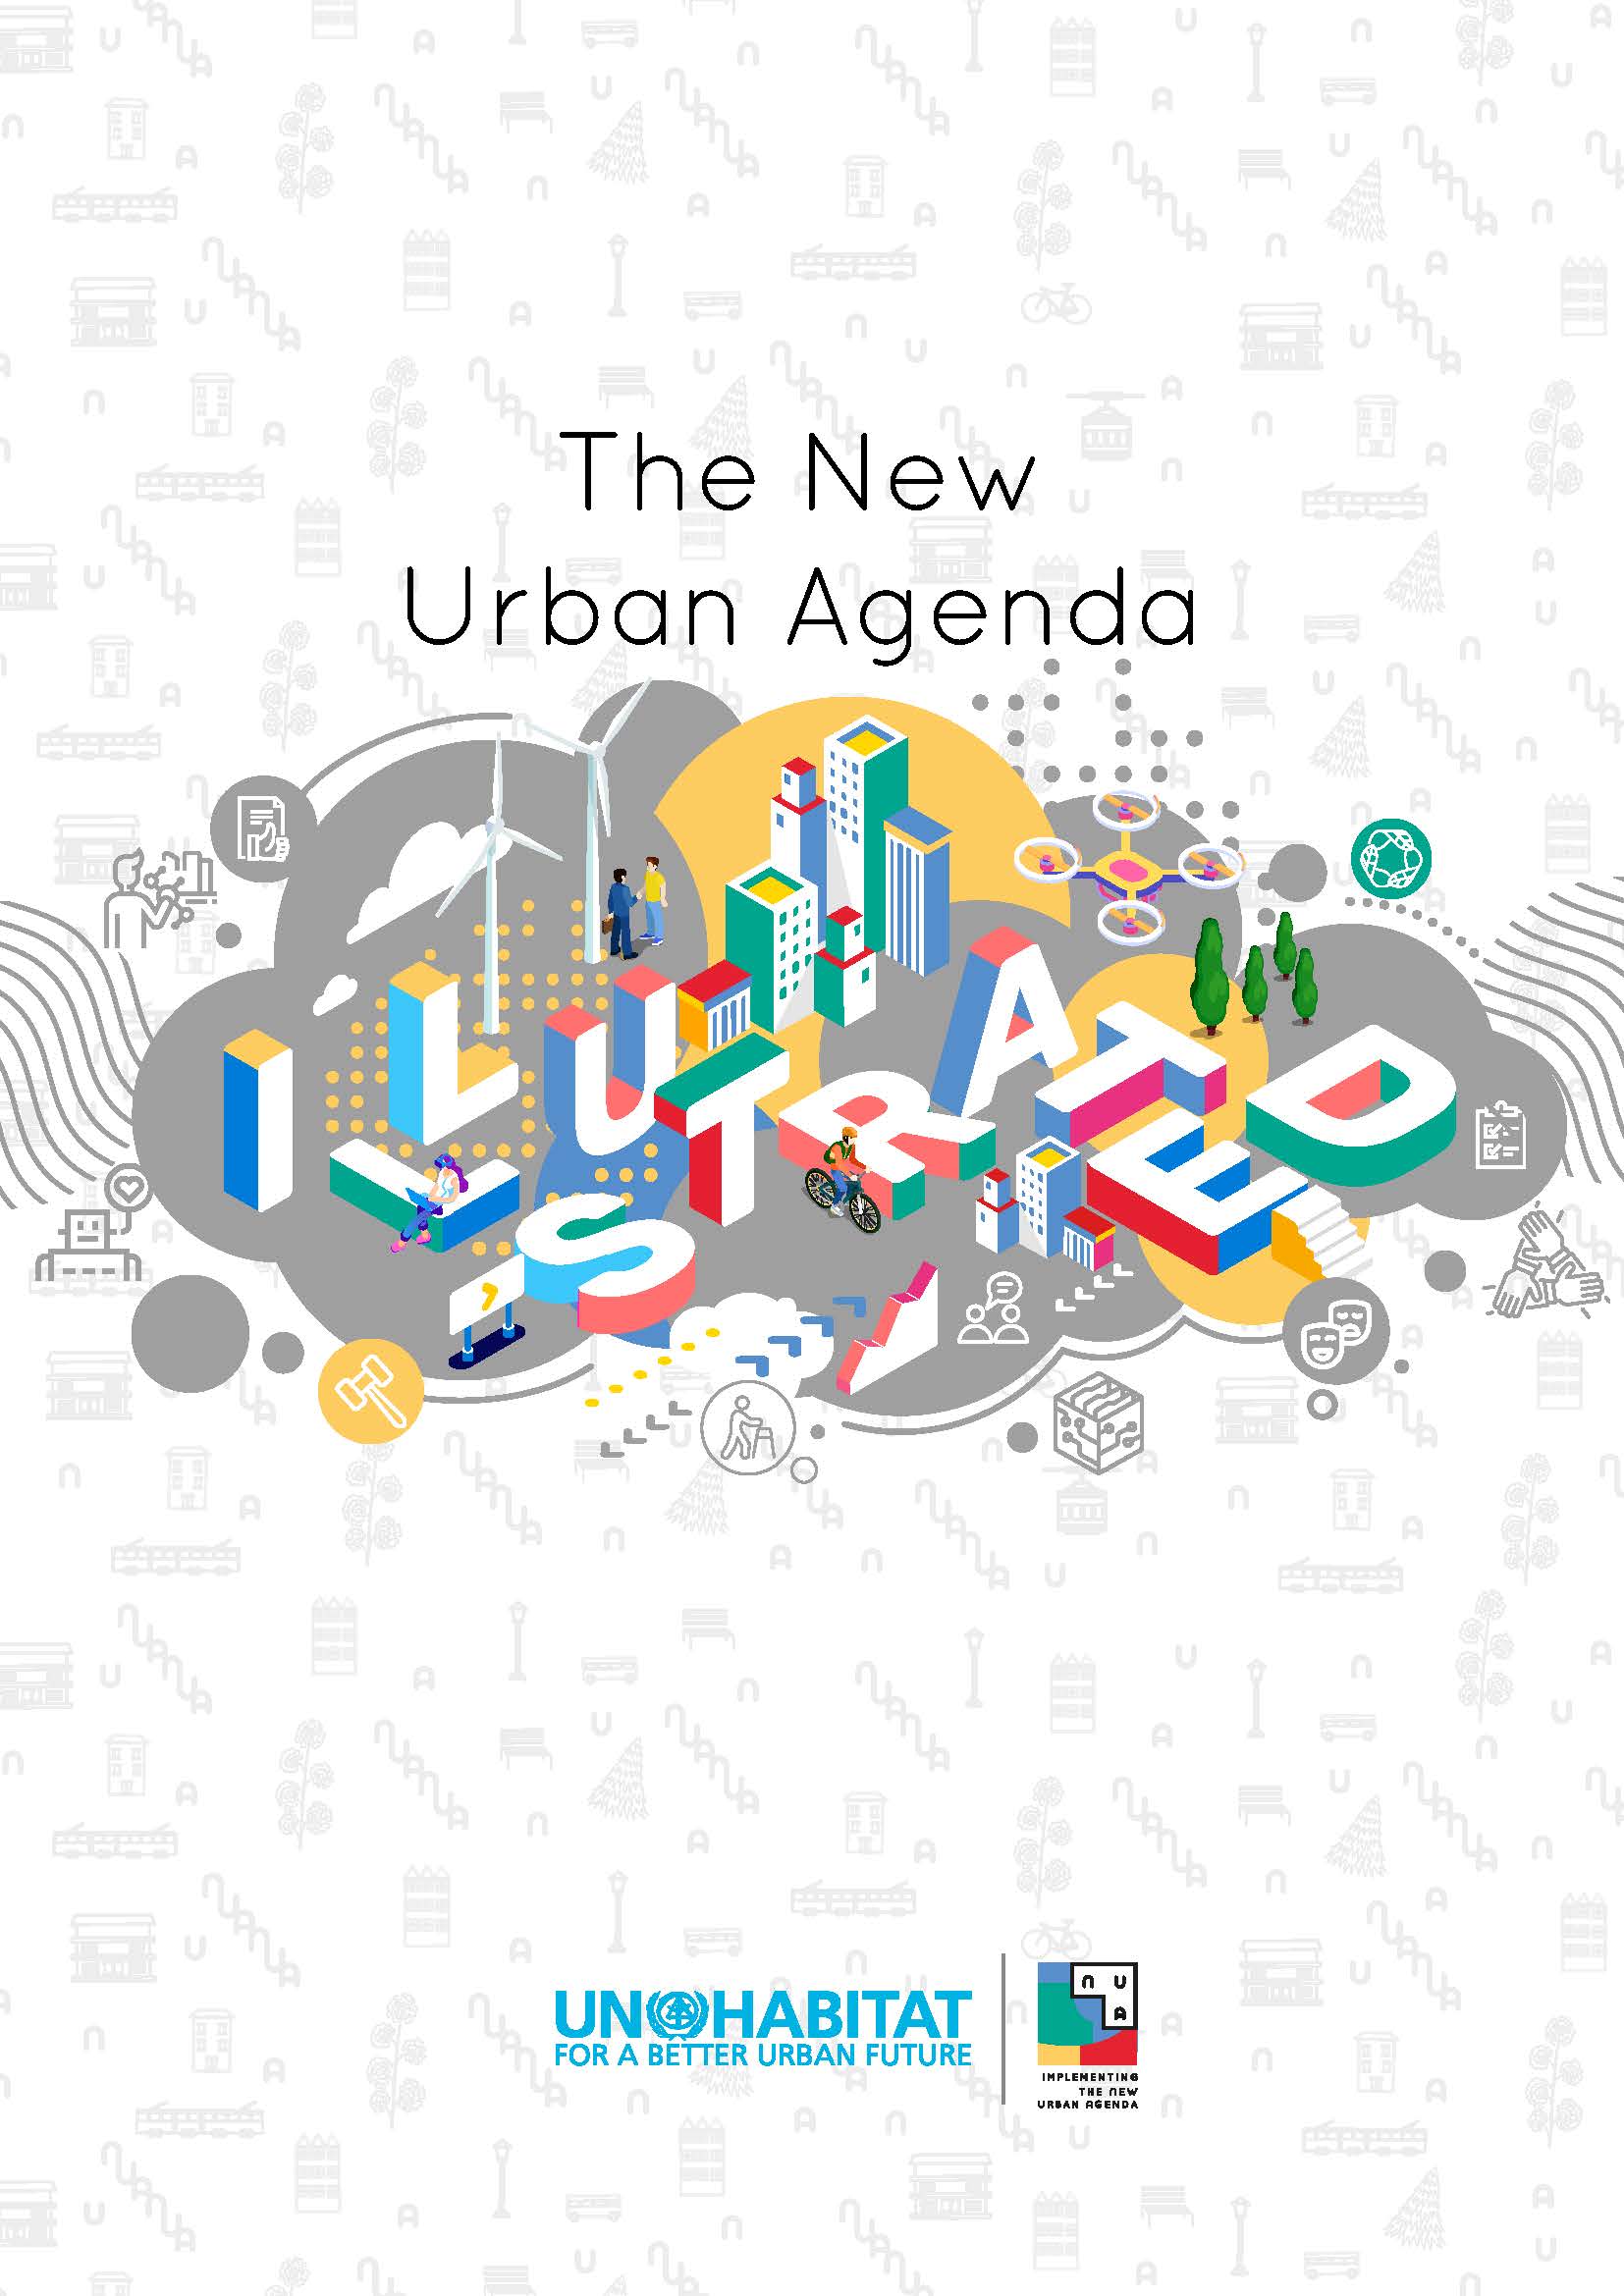 United Nations Centre for Human Settlements  - <blockquote>The New Urban Agenda, adopted at Habitat III in Quito, Ecuador, on 20 October 2016, presents a paradigm shift based on the science of cities and lays out standards and principles for the planning, construction, development, management and improvement of urban areas. The New Urban Agenda is intended as a resource for different actors in multiple levels of government and for civil society organizations, the private sector and all who reside in urban spaces of the world. The New Urban Agenda highlights linkages between sustainable urbanization and job creation, livelihood opportunities and improved quality of life, and it insists on incorporation of all these sectors in every urban development or renewal policy and strategy.</blockquote><p>UN-HABITAT. 2020.&nbsp;<em>The New Urban Agenda</em>.&nbsp;https://unhabitat.org/the-new-urban-agenda-illustrated. Archived at: <a href="https://perma.cc/LT2E-NH3C" rel="noopener noreferrer" target="_blank">https://perma.cc/LT2E-NH3C</a>.</p>